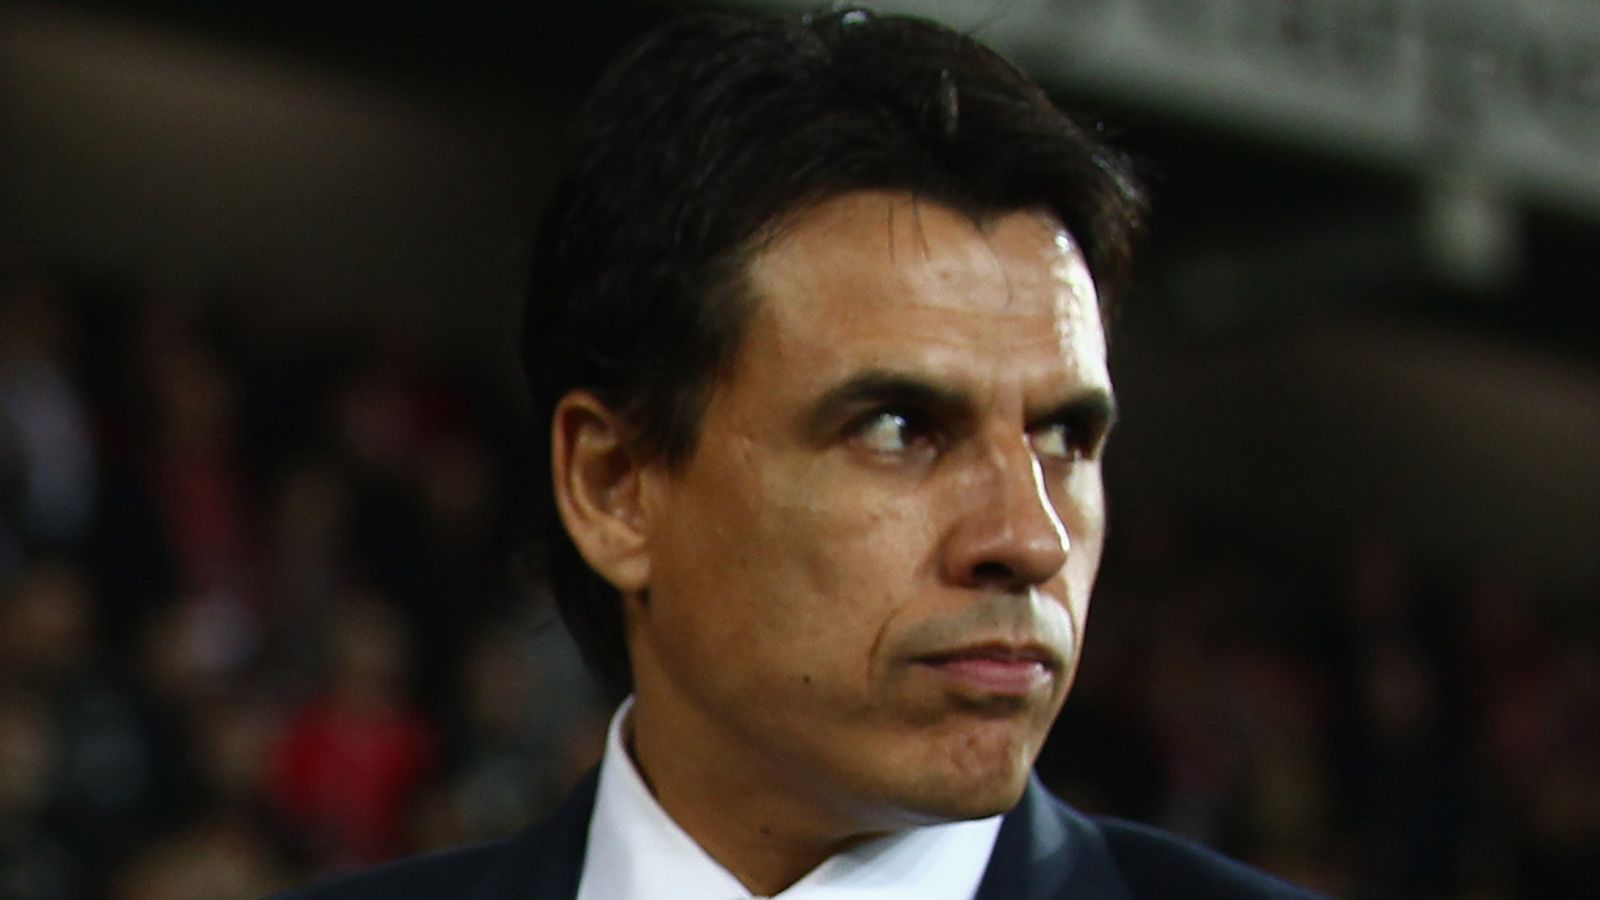 Chris Coleman expects Wales' goal drought to end against Serbia